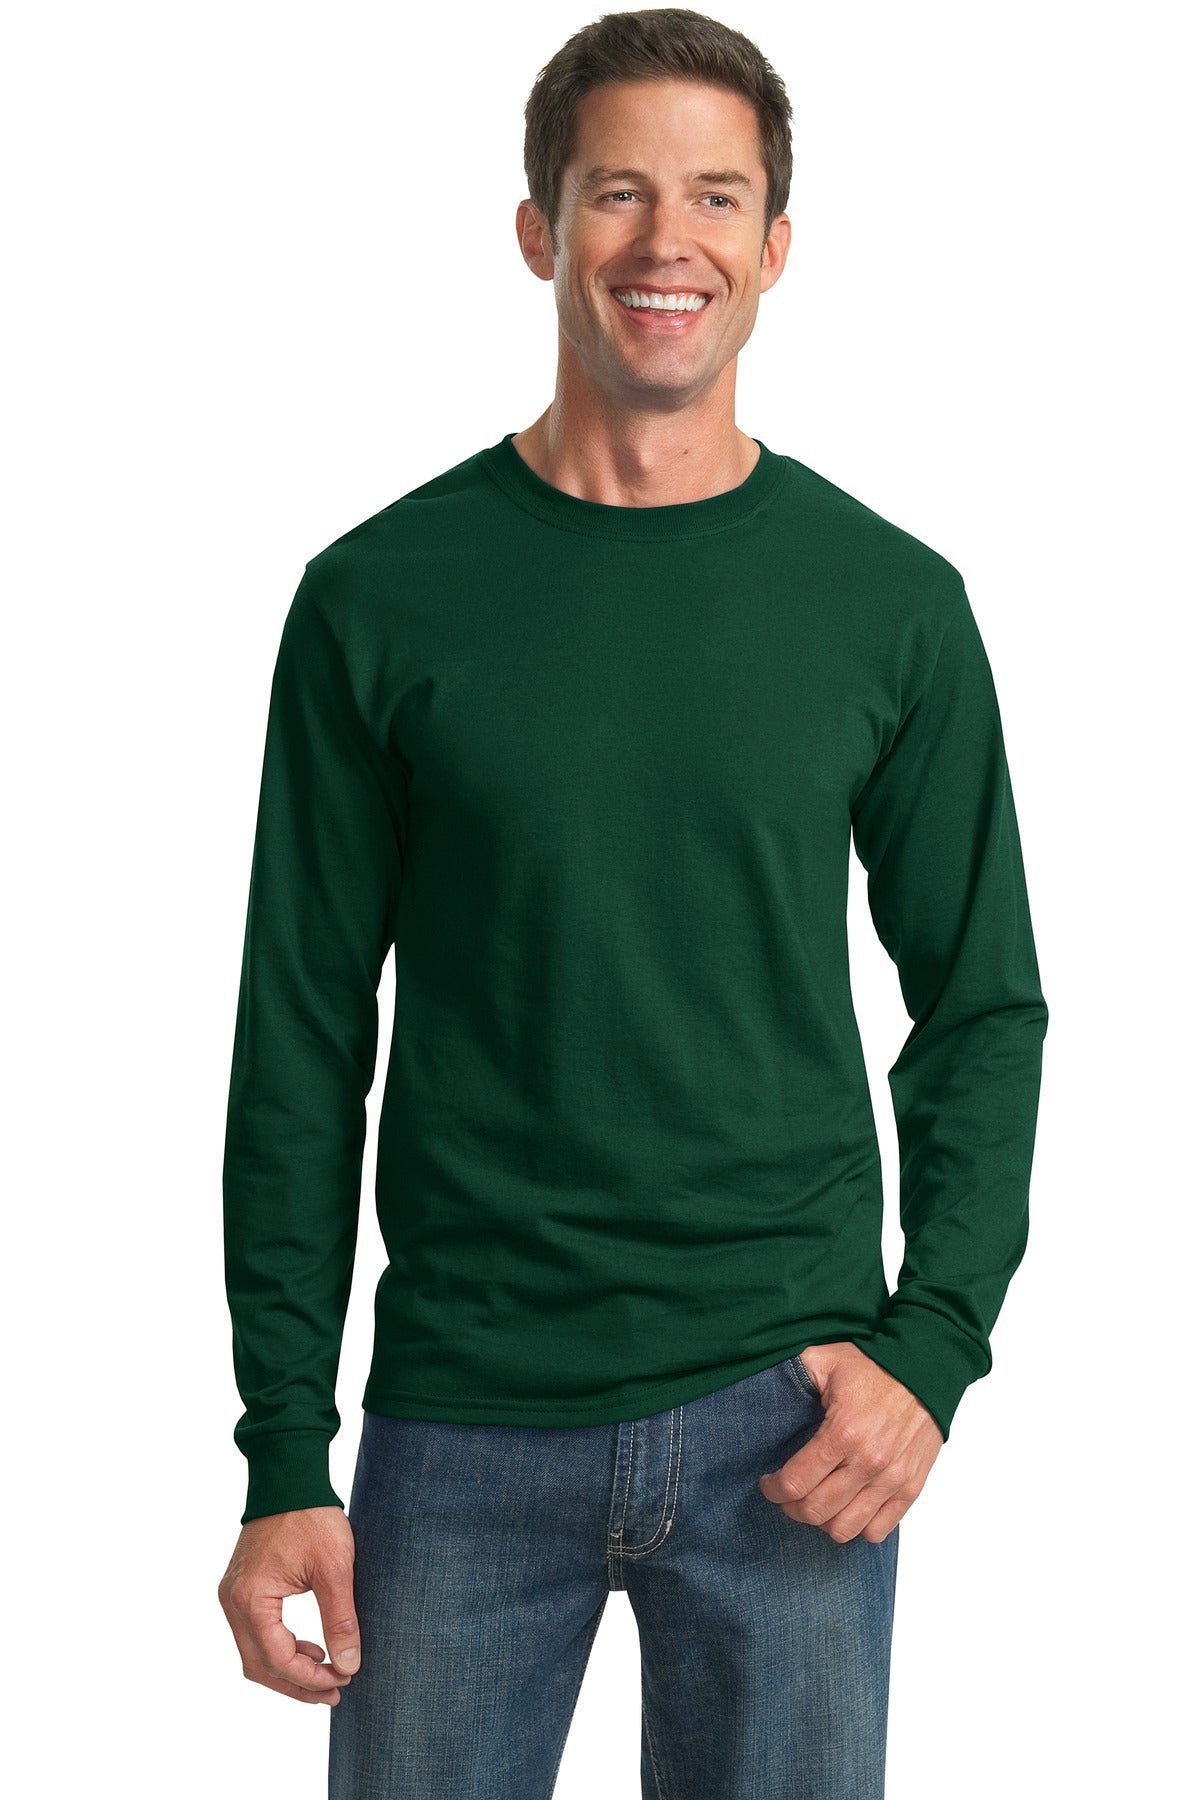 JERZEES® - Dri-Power® 50/50 Cotton/Poly Long Sleeve T-Shirt. 29LS [Forest Green] - DFW Impression